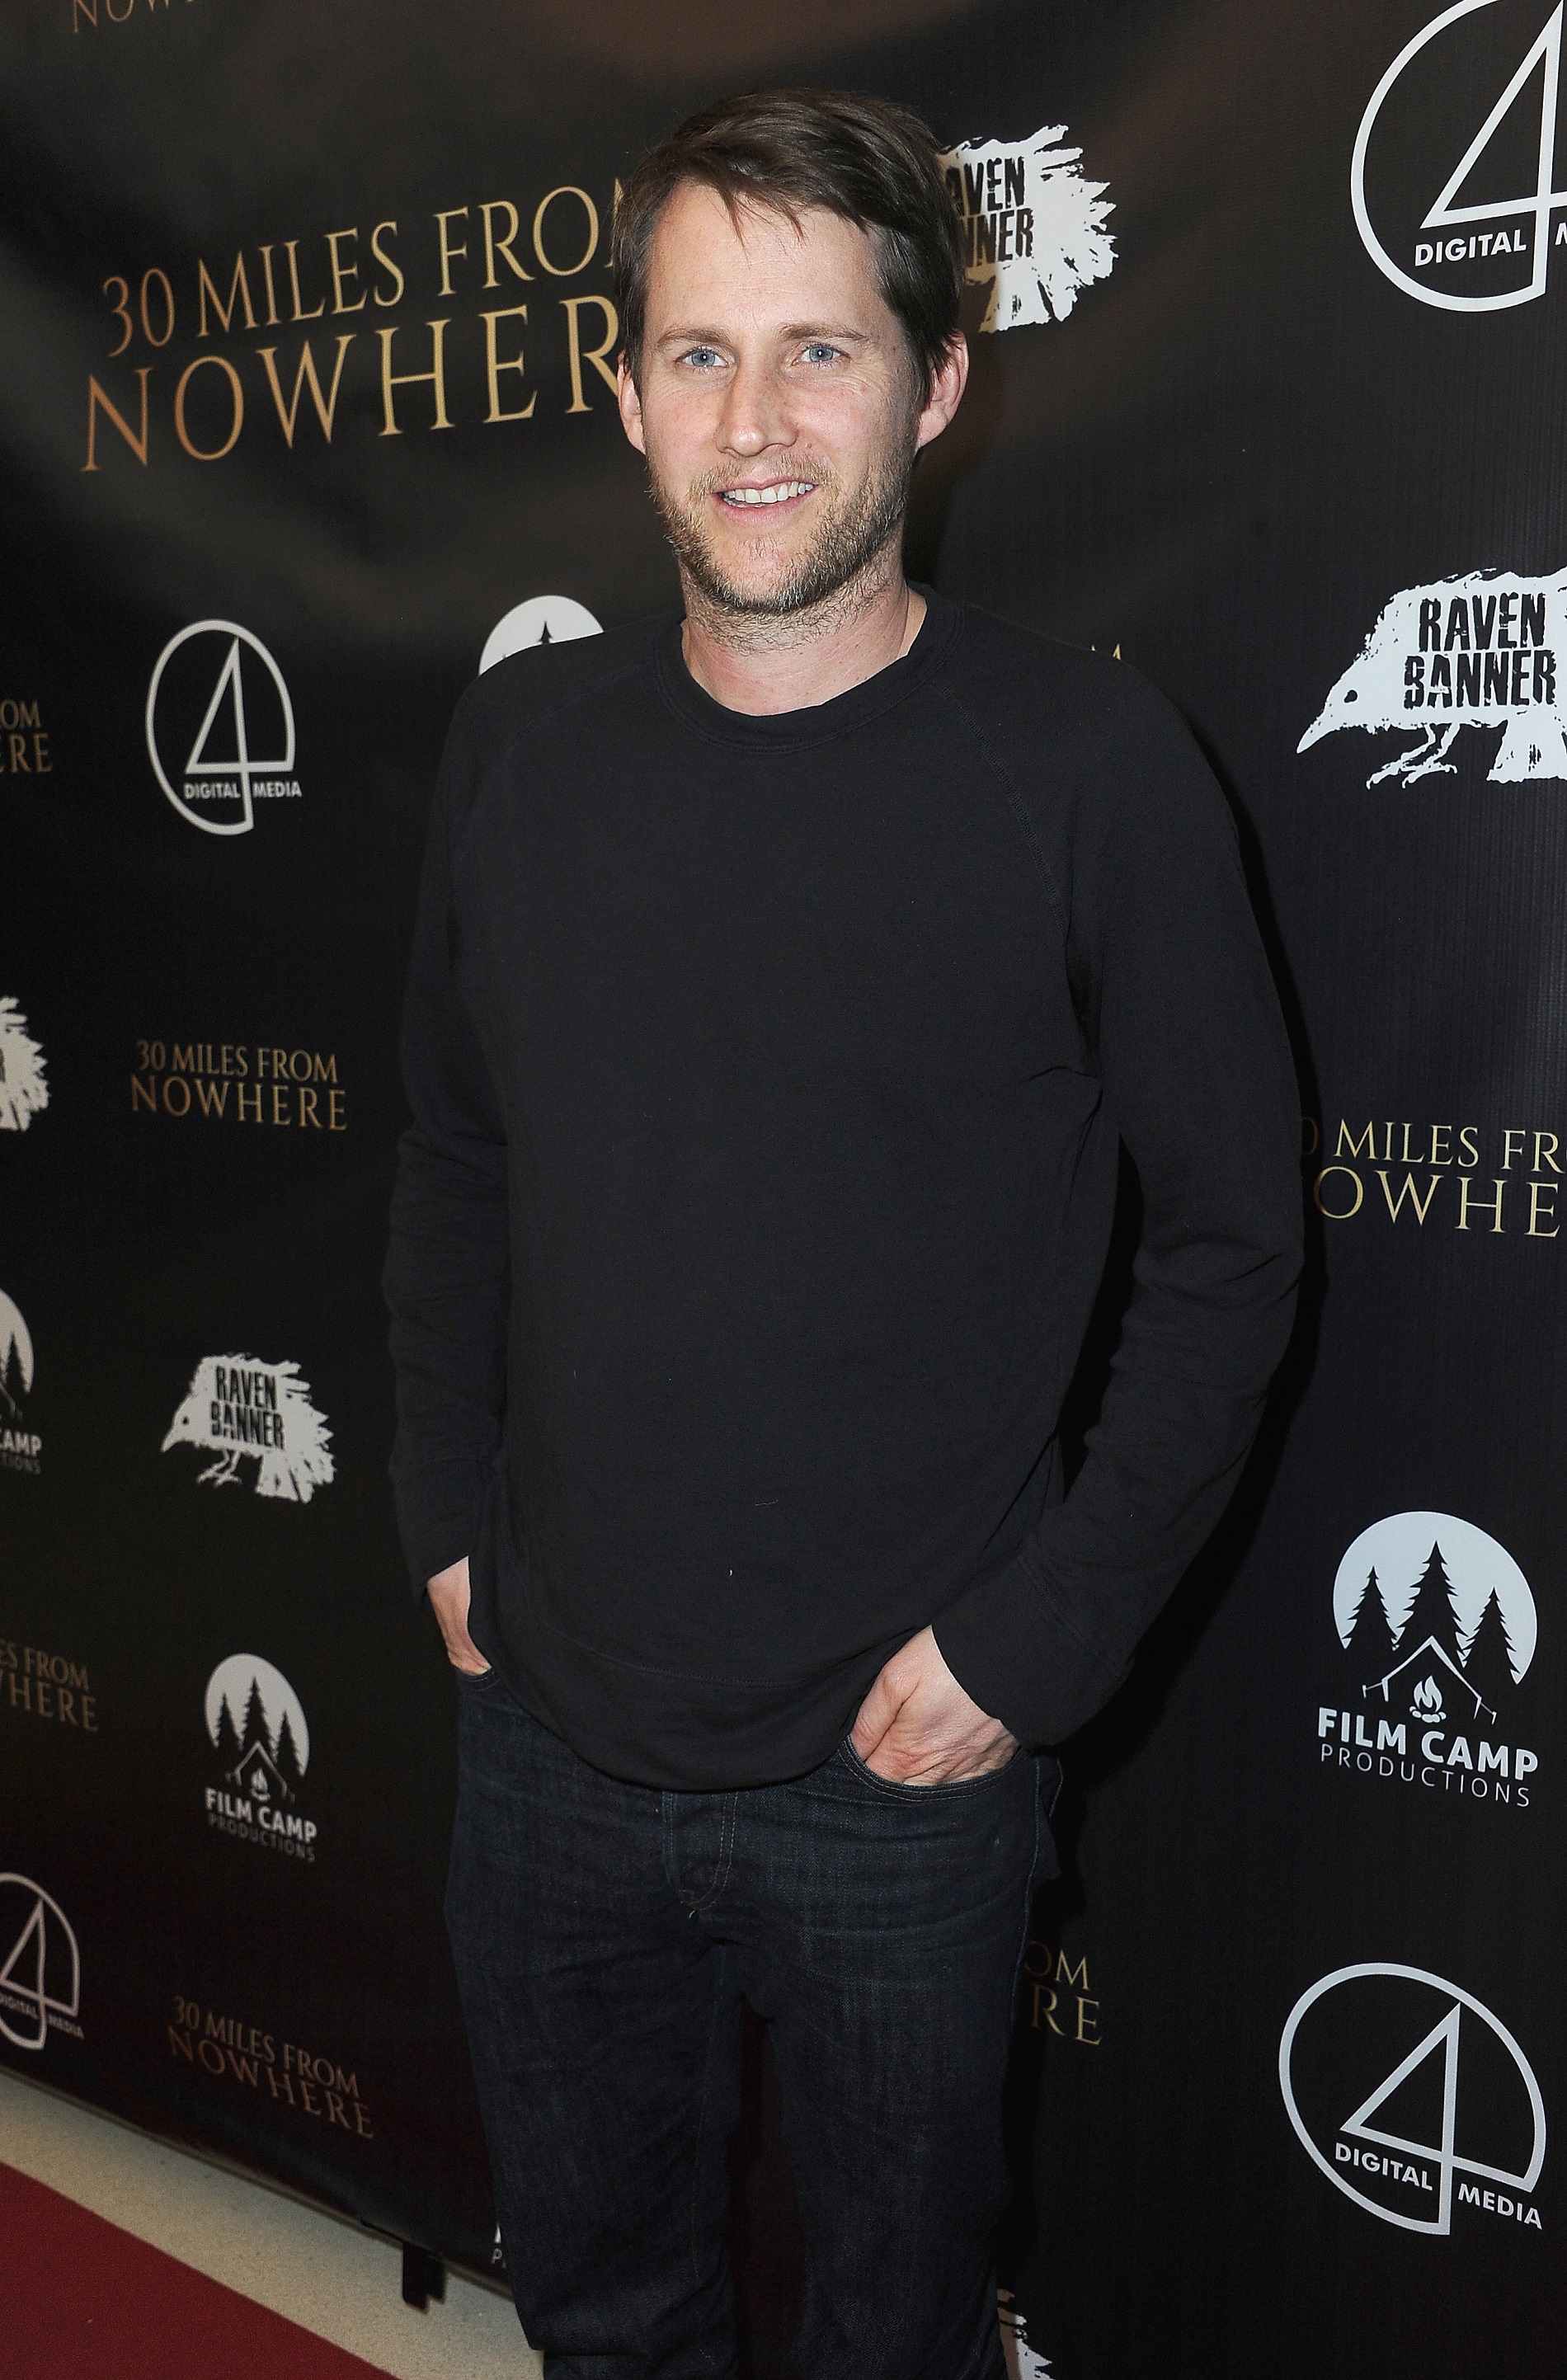 'A Million Little Things' guest cast member Derek Richardson at the premiere of '30 Miles From Nowhere'